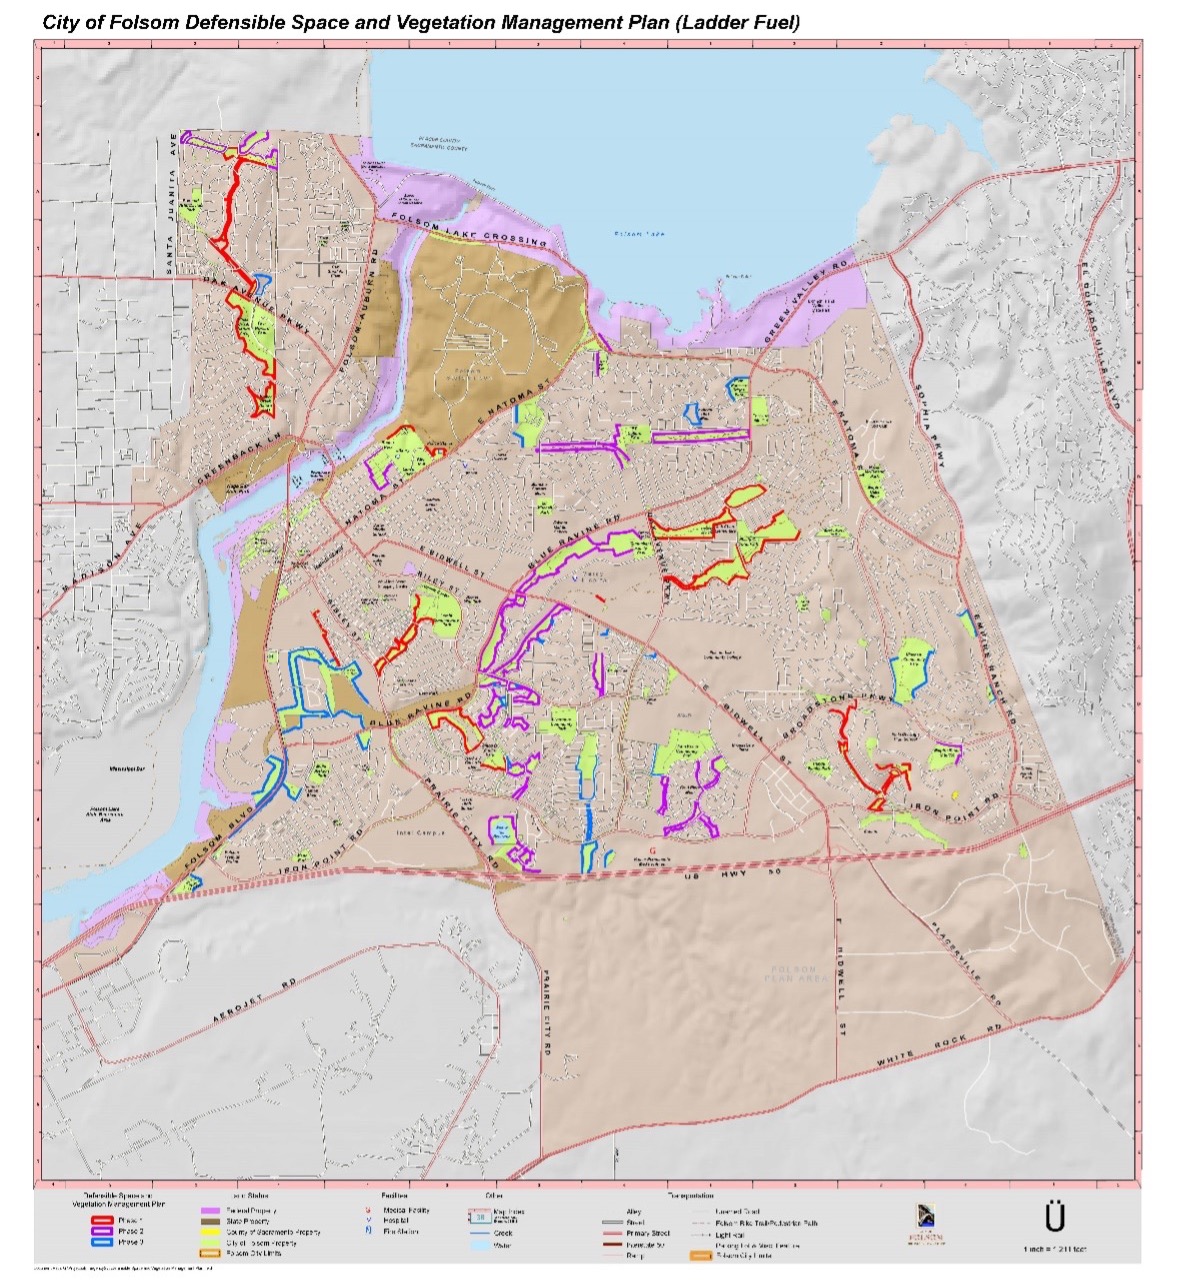 City of Folsom Defensible Space and Vegetation Management Plan map